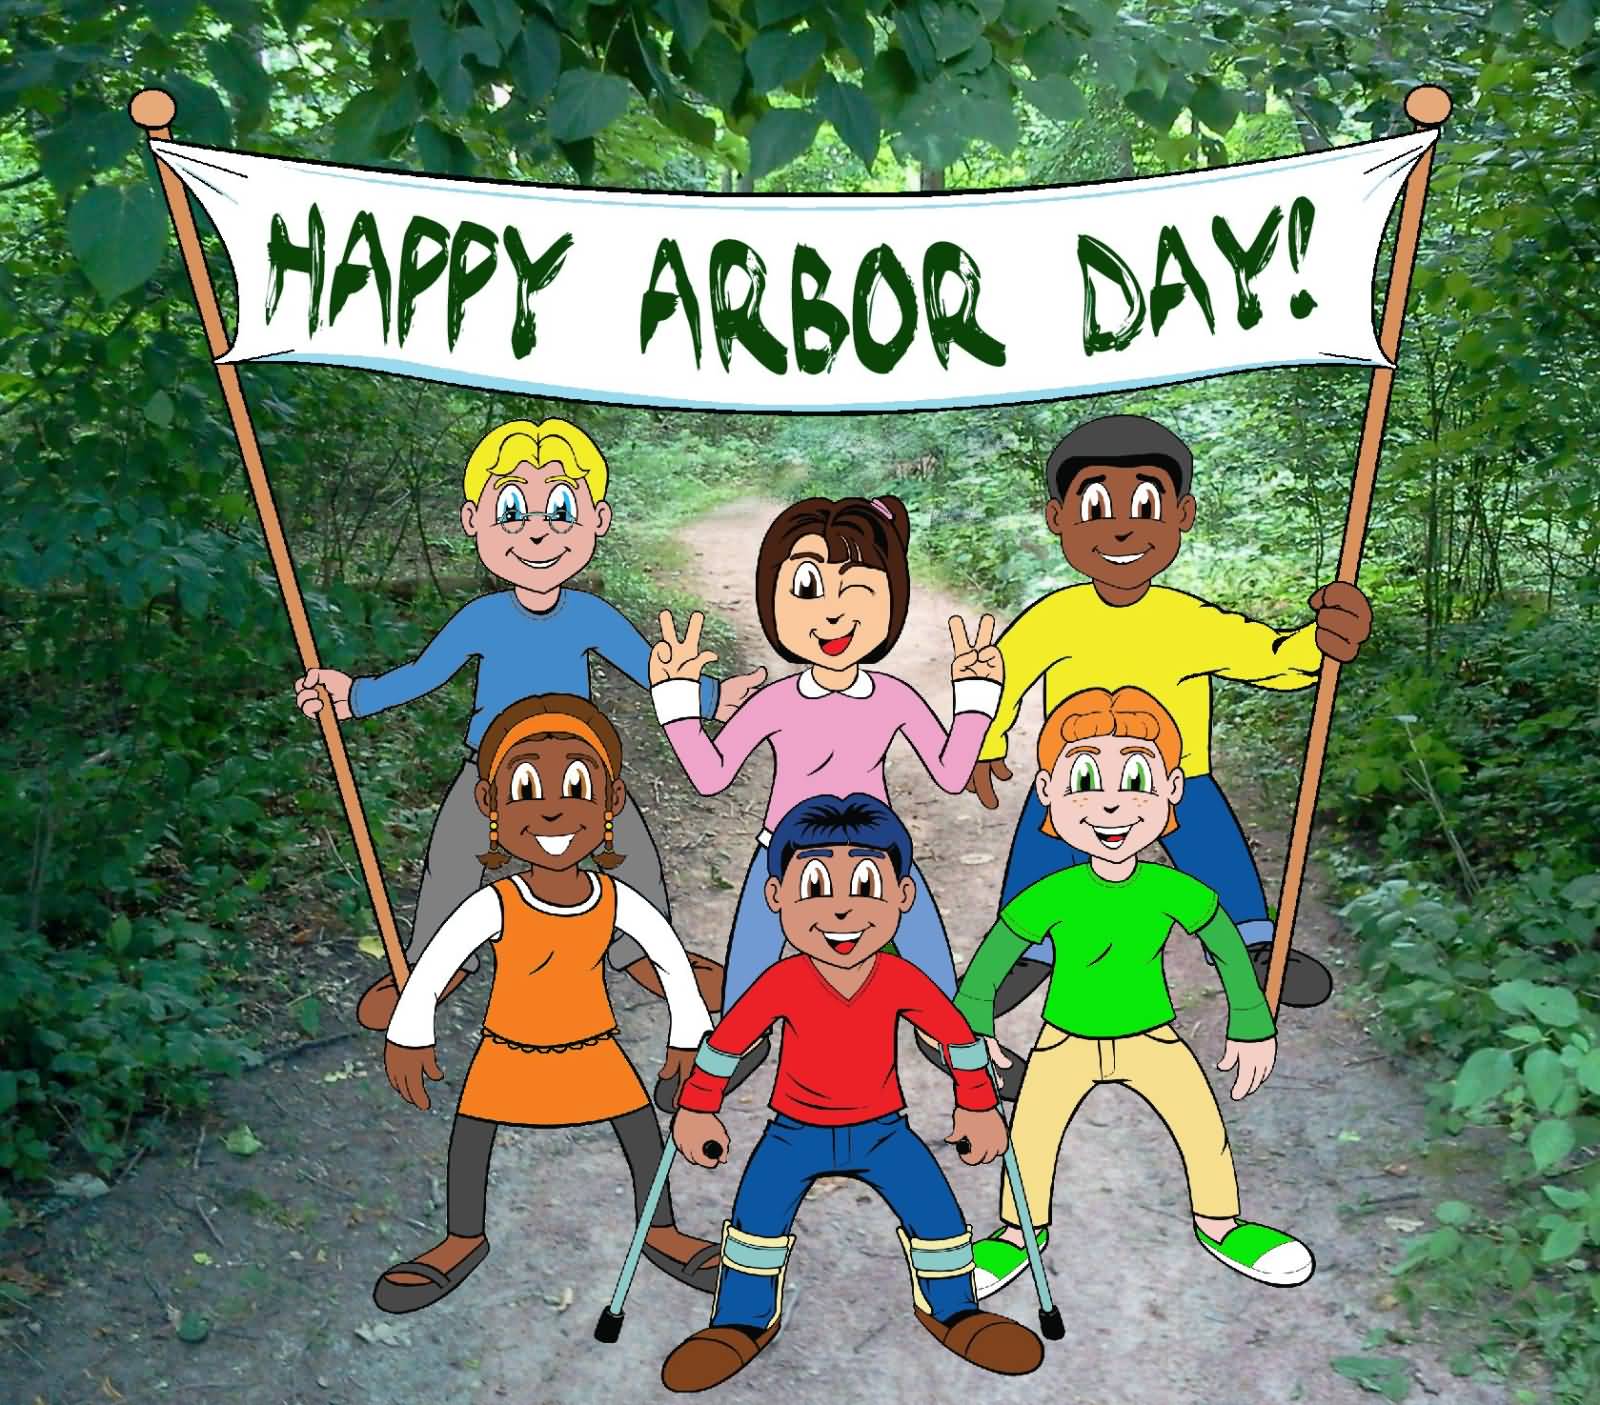 Kids With Happy Arbor Day Banner Illustration